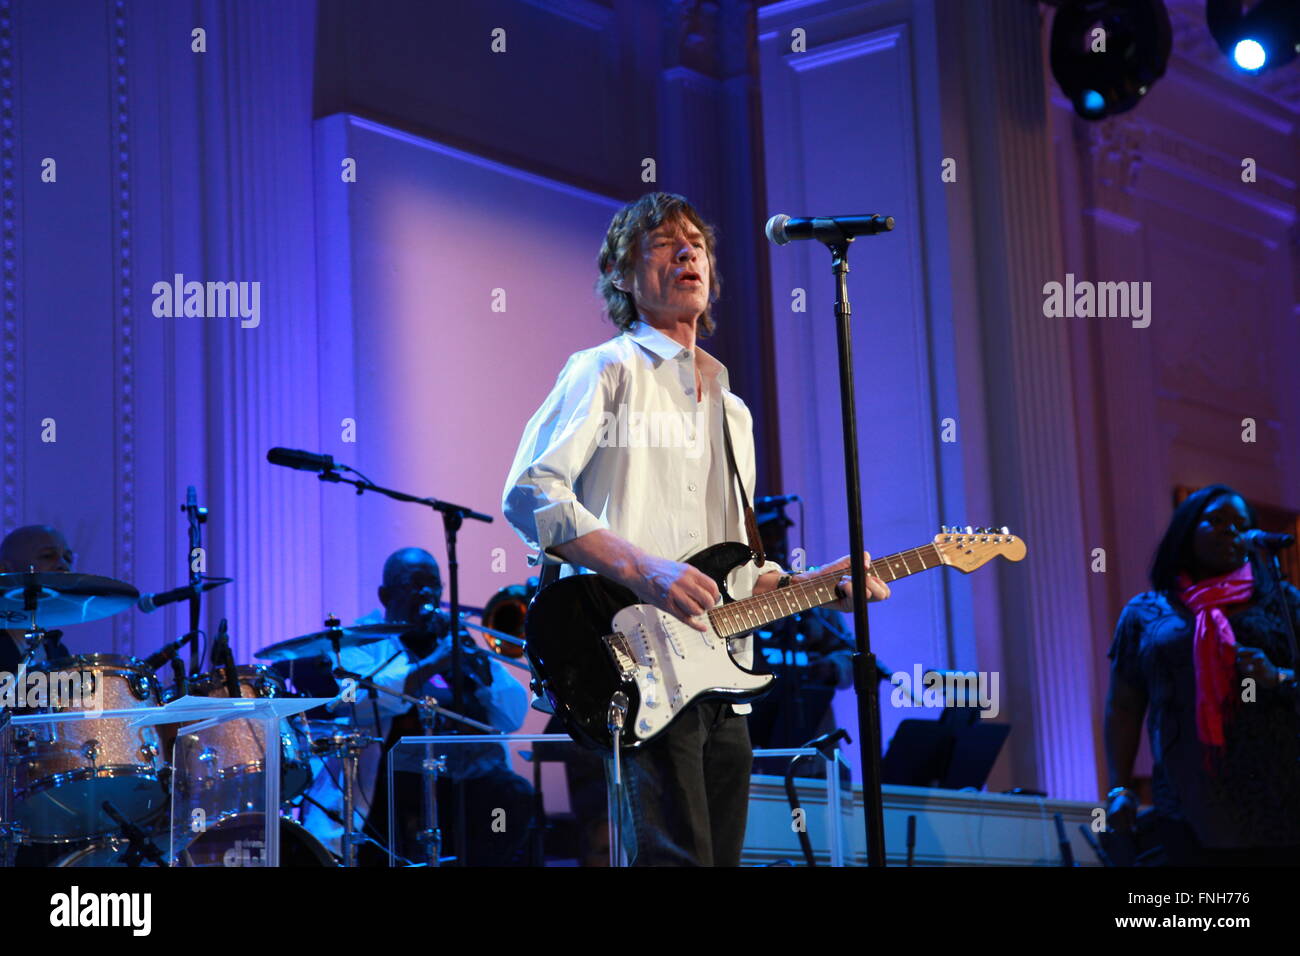 Mick Jagger during rehearsal for his appearance at the In Performance at the White House: Red, White and Blues concert in the East Room of the White House February 20, 2012 in Washington, DC. Stock Photo